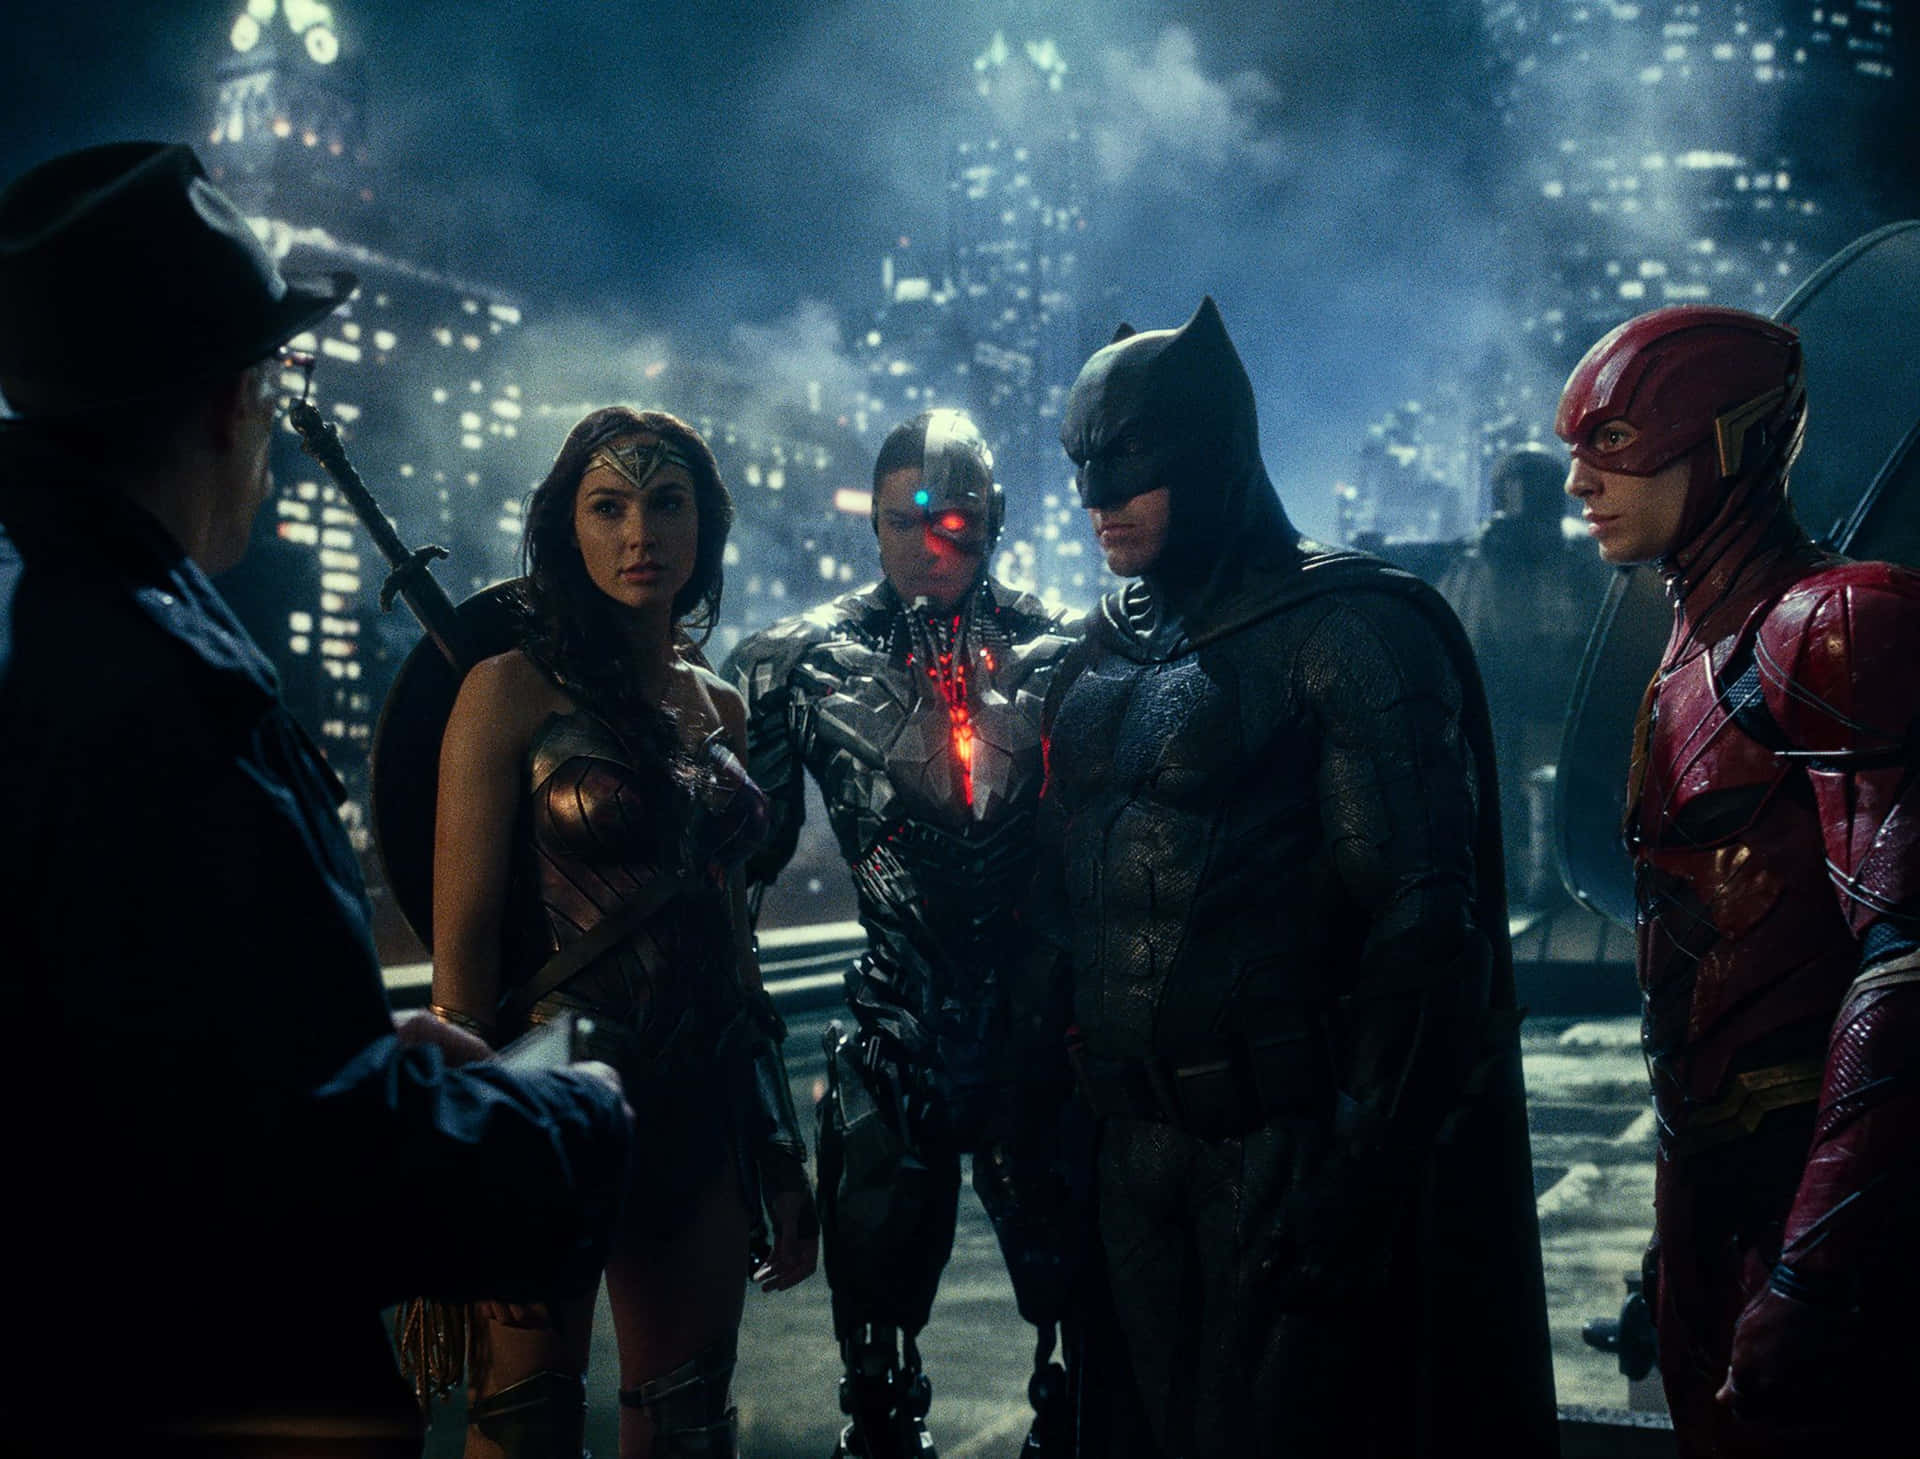 Heroes Assemble in Zack Snyder's Justice League Wallpaper